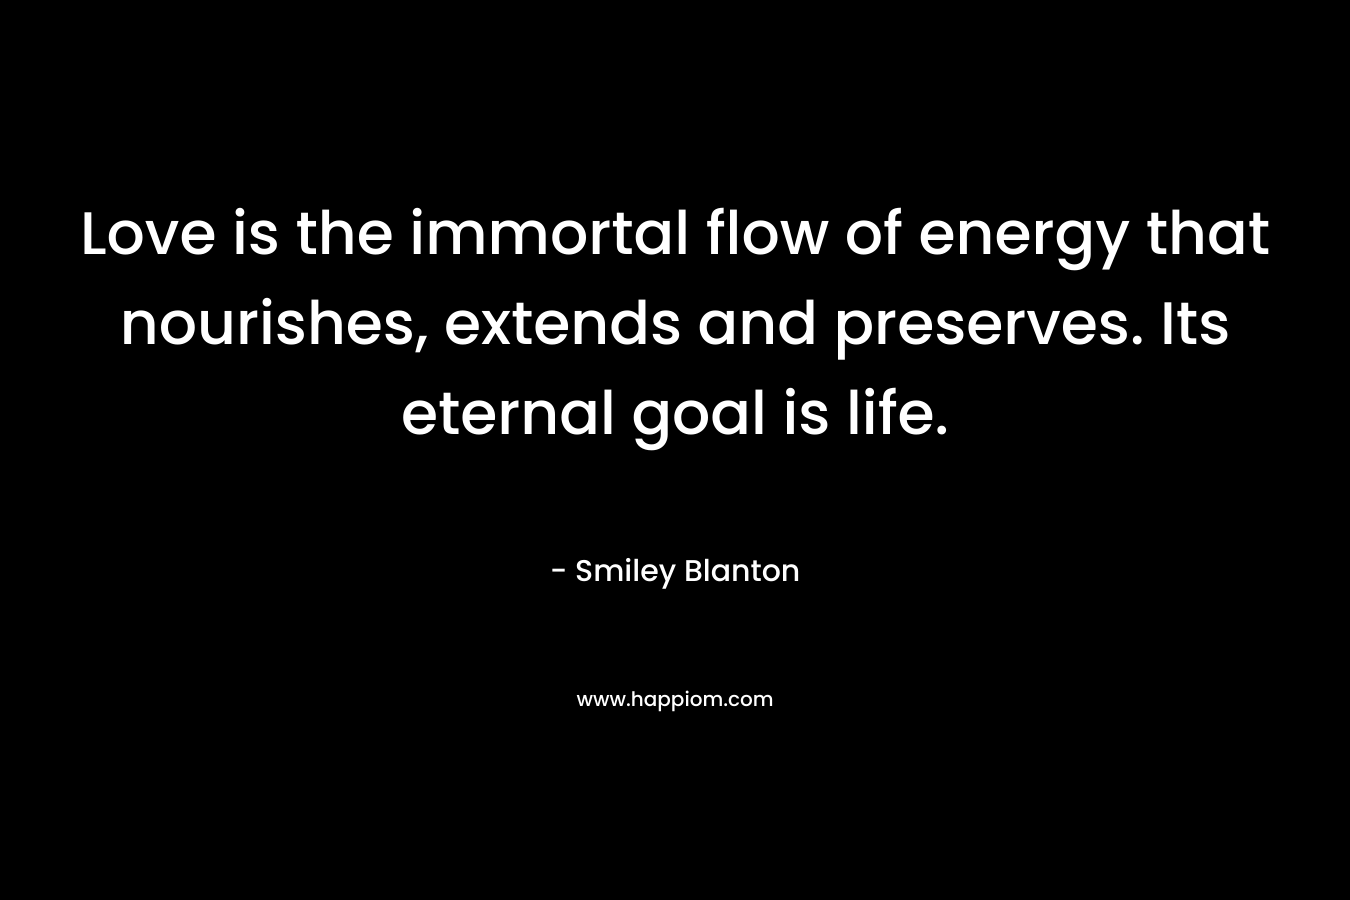 Love is the immortal flow of energy that nourishes, extends and preserves. Its eternal goal is life. – Smiley Blanton